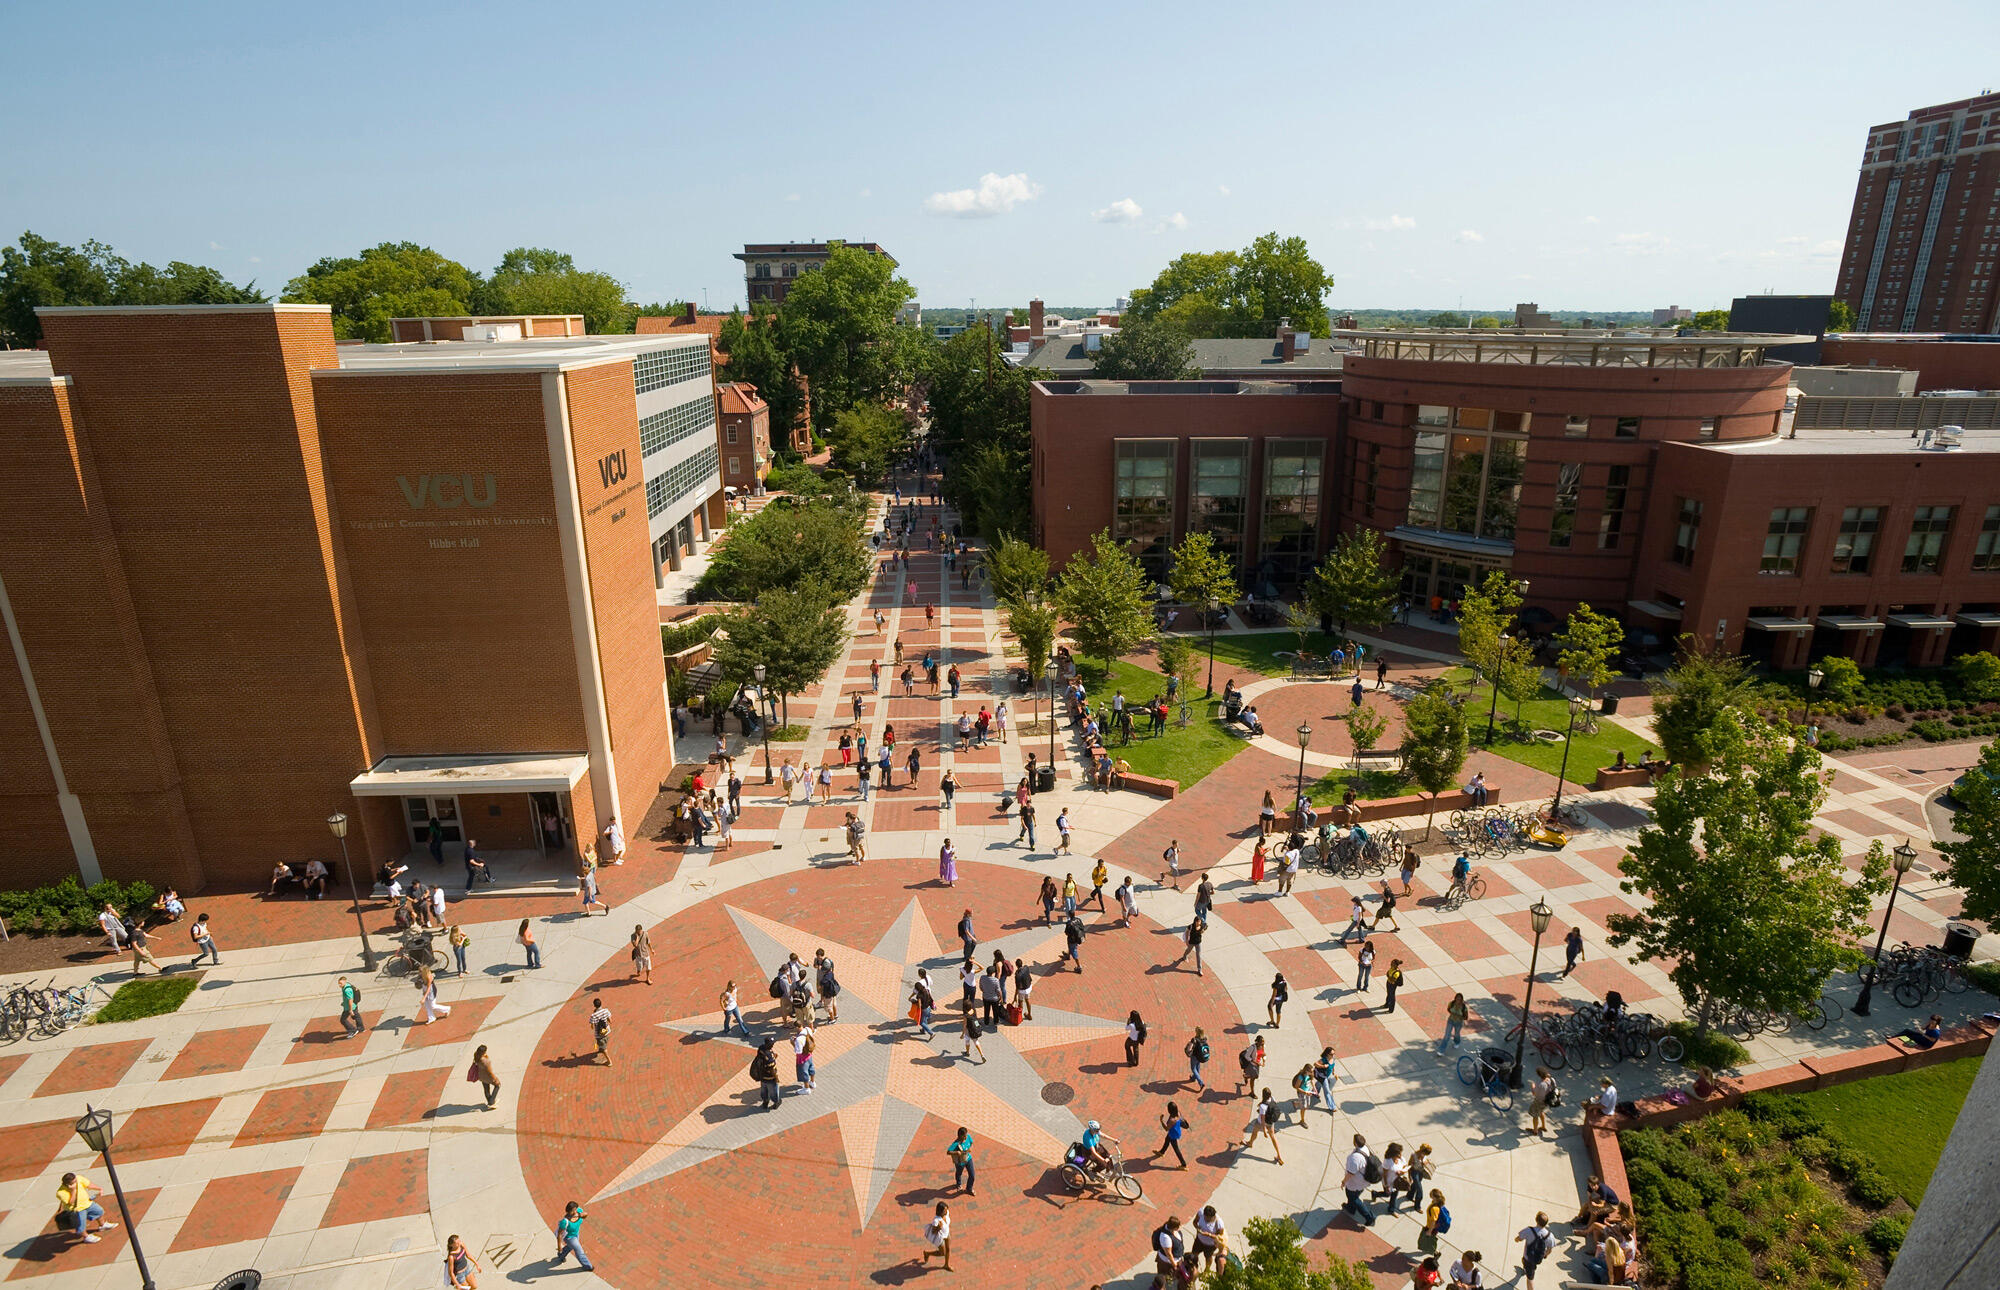 Image from above of the VCU Compass area, a large courtyard scattered with people